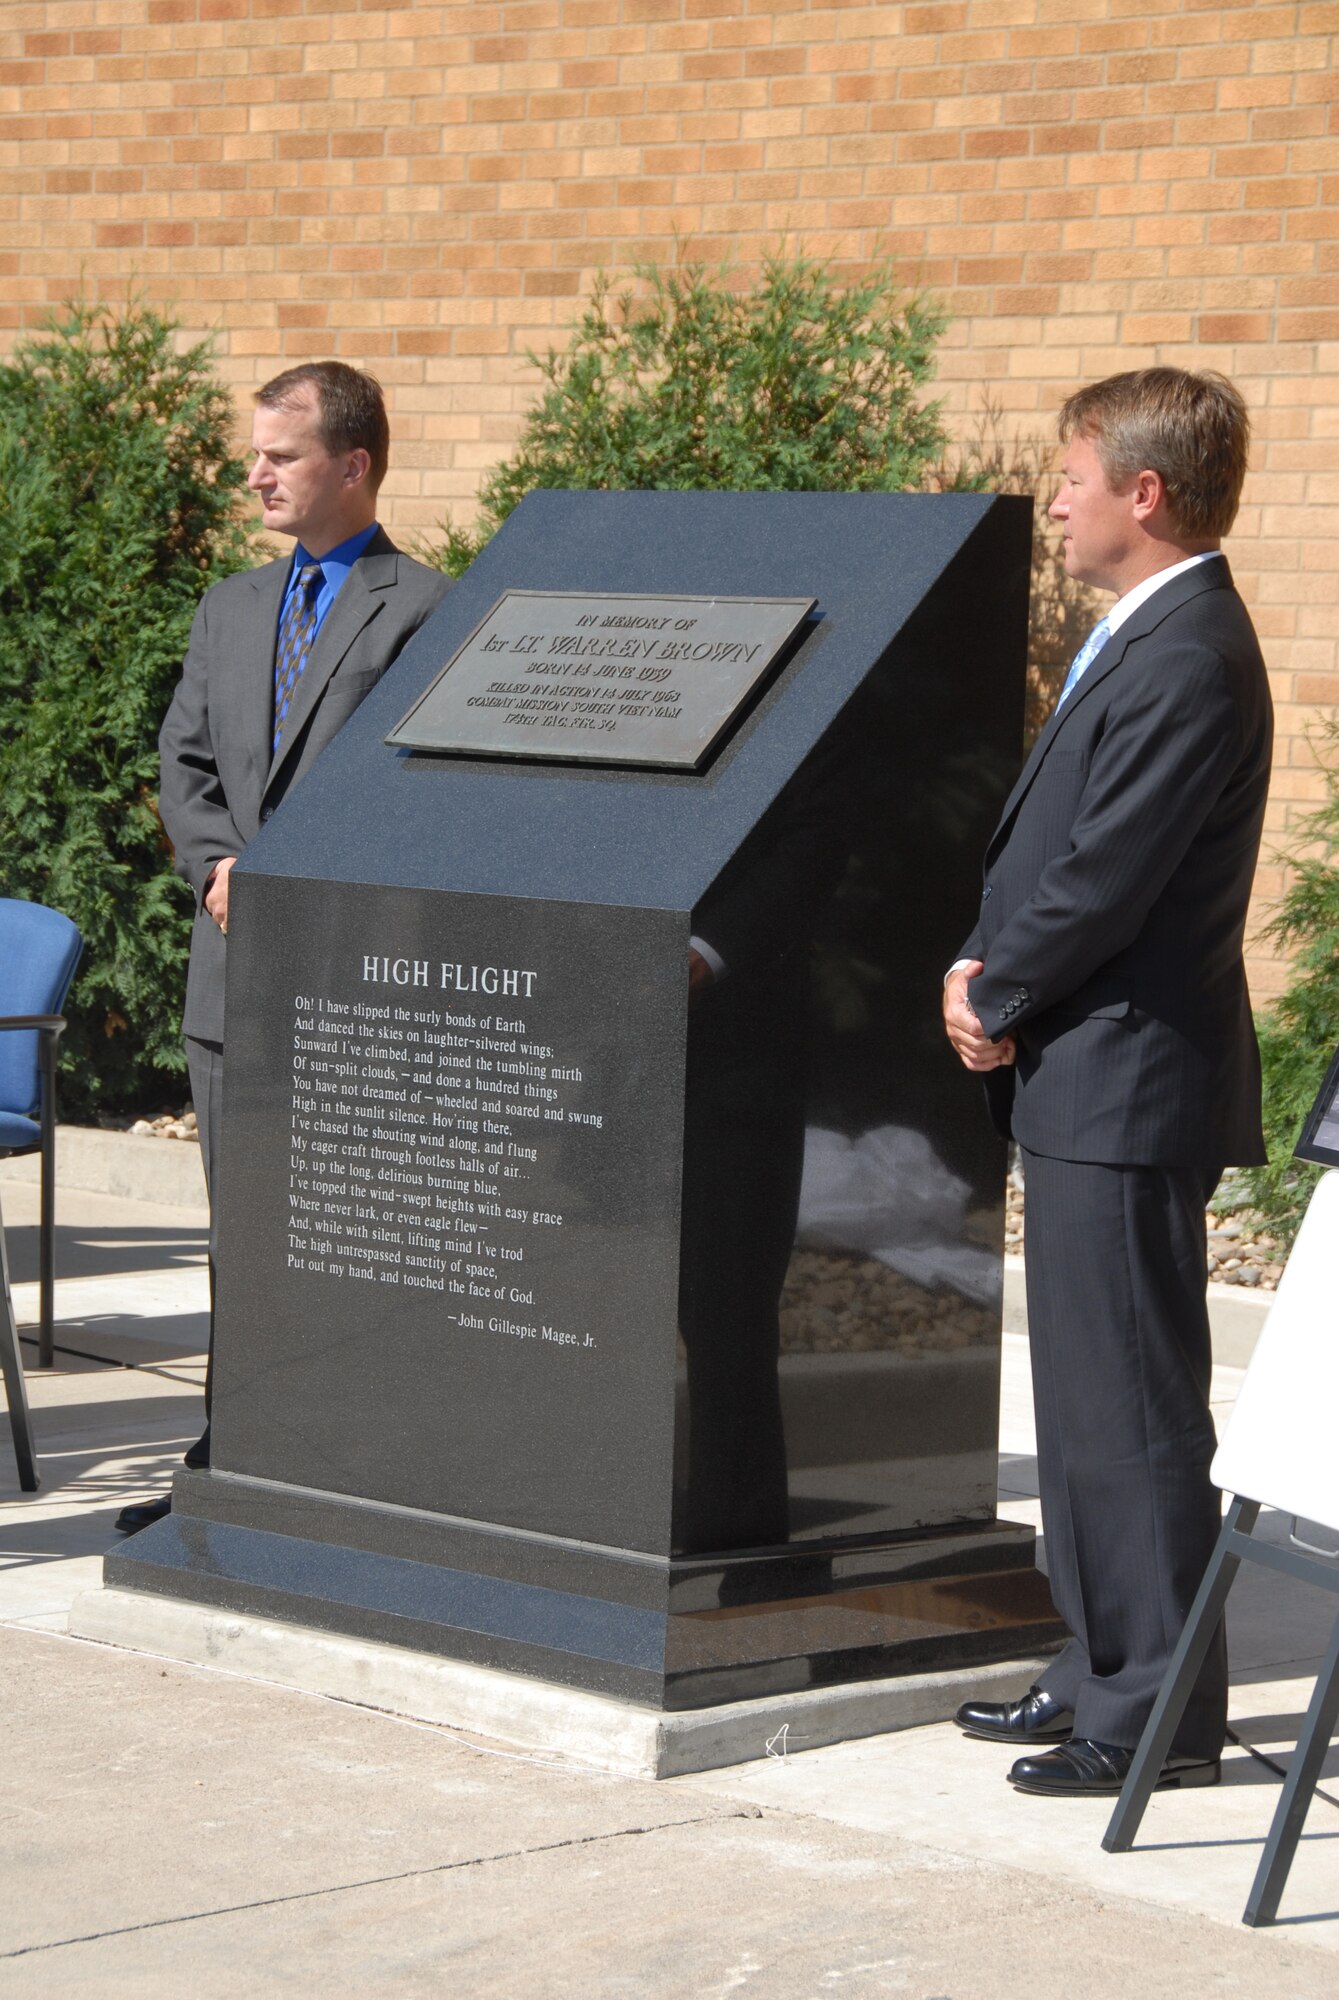 The dedication ceremony for First Lieutenant (1st Lt.) Warren Brown at the Sioux City Airport, in Sioux City, Iowa, on 14 July, 2008.  1st Lt. Brown was shot down and killed in Vietnam on 14 July, 1968.  His sons were present to mark the occasion.  (US Air Force photo by SSgt. Brian Cox) (Released by Public Affairs Manager, Master Sergeant Vincent DeGroot)